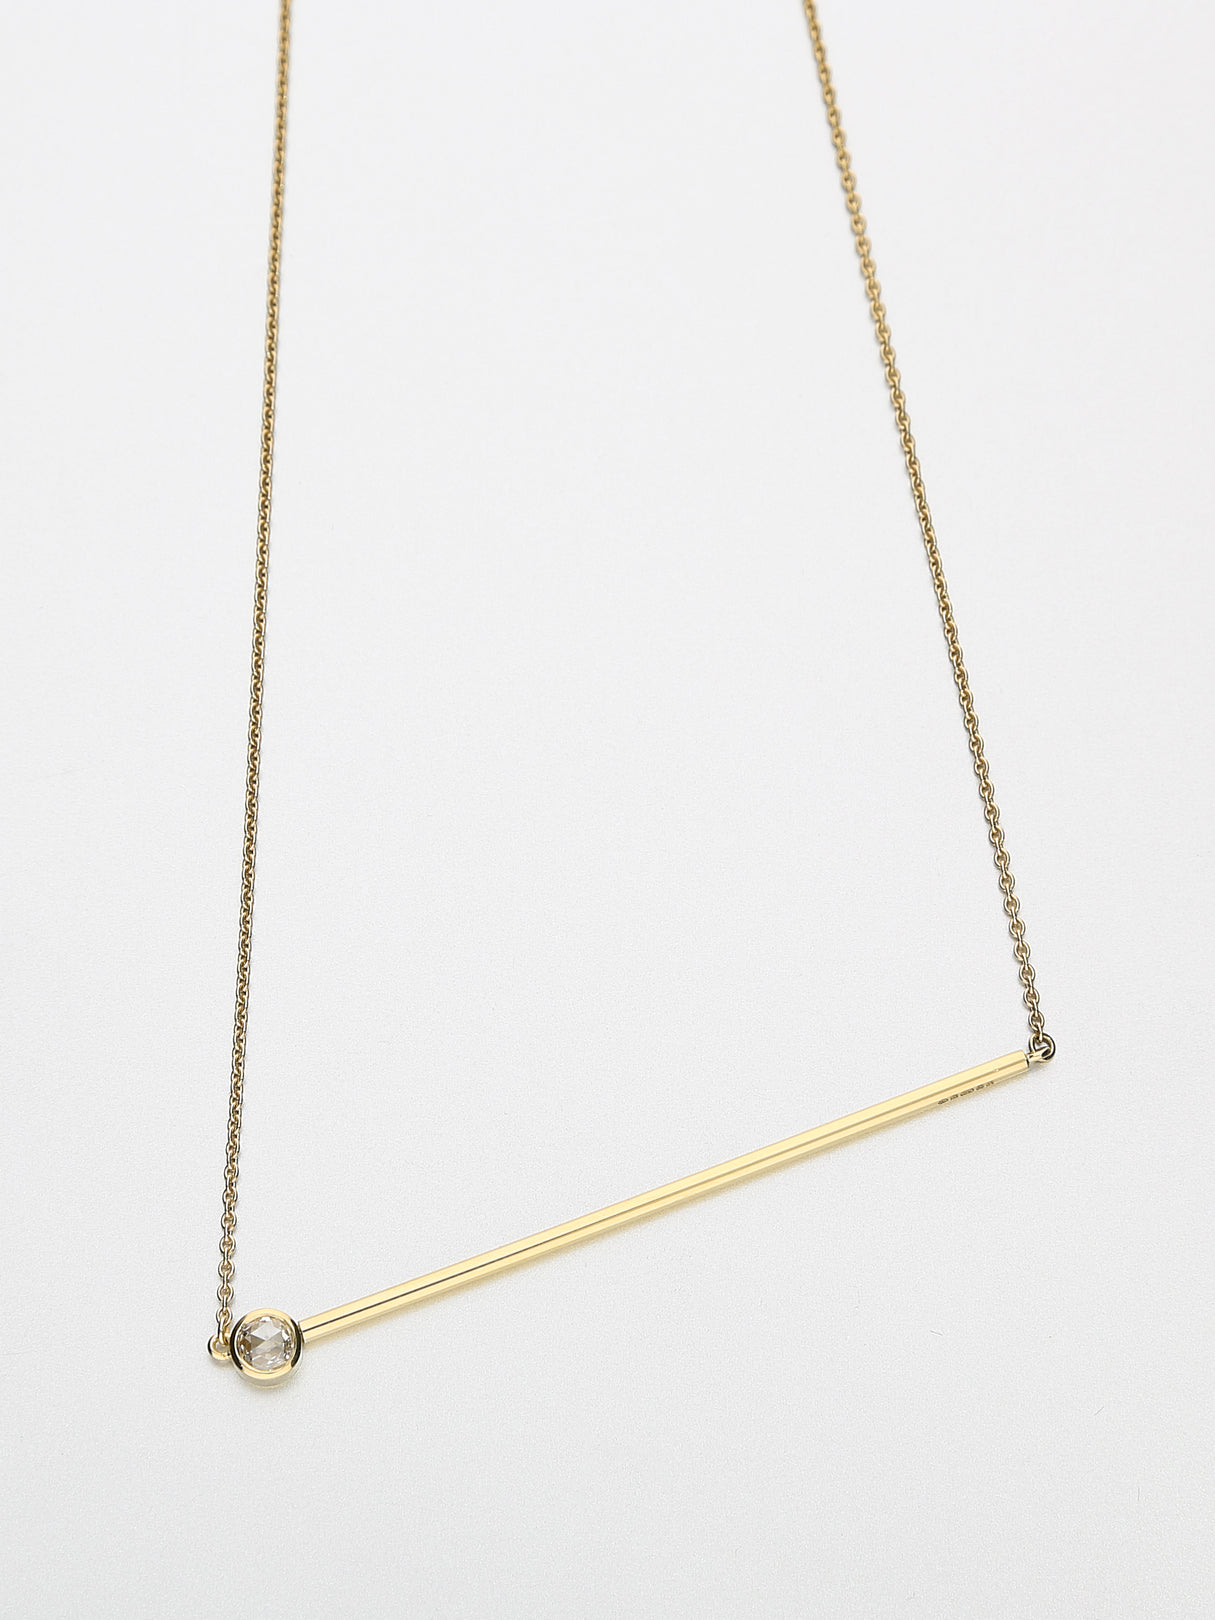 Abacus rose cut Diamond Necklace, Yellow gold with a white rose cut diamond